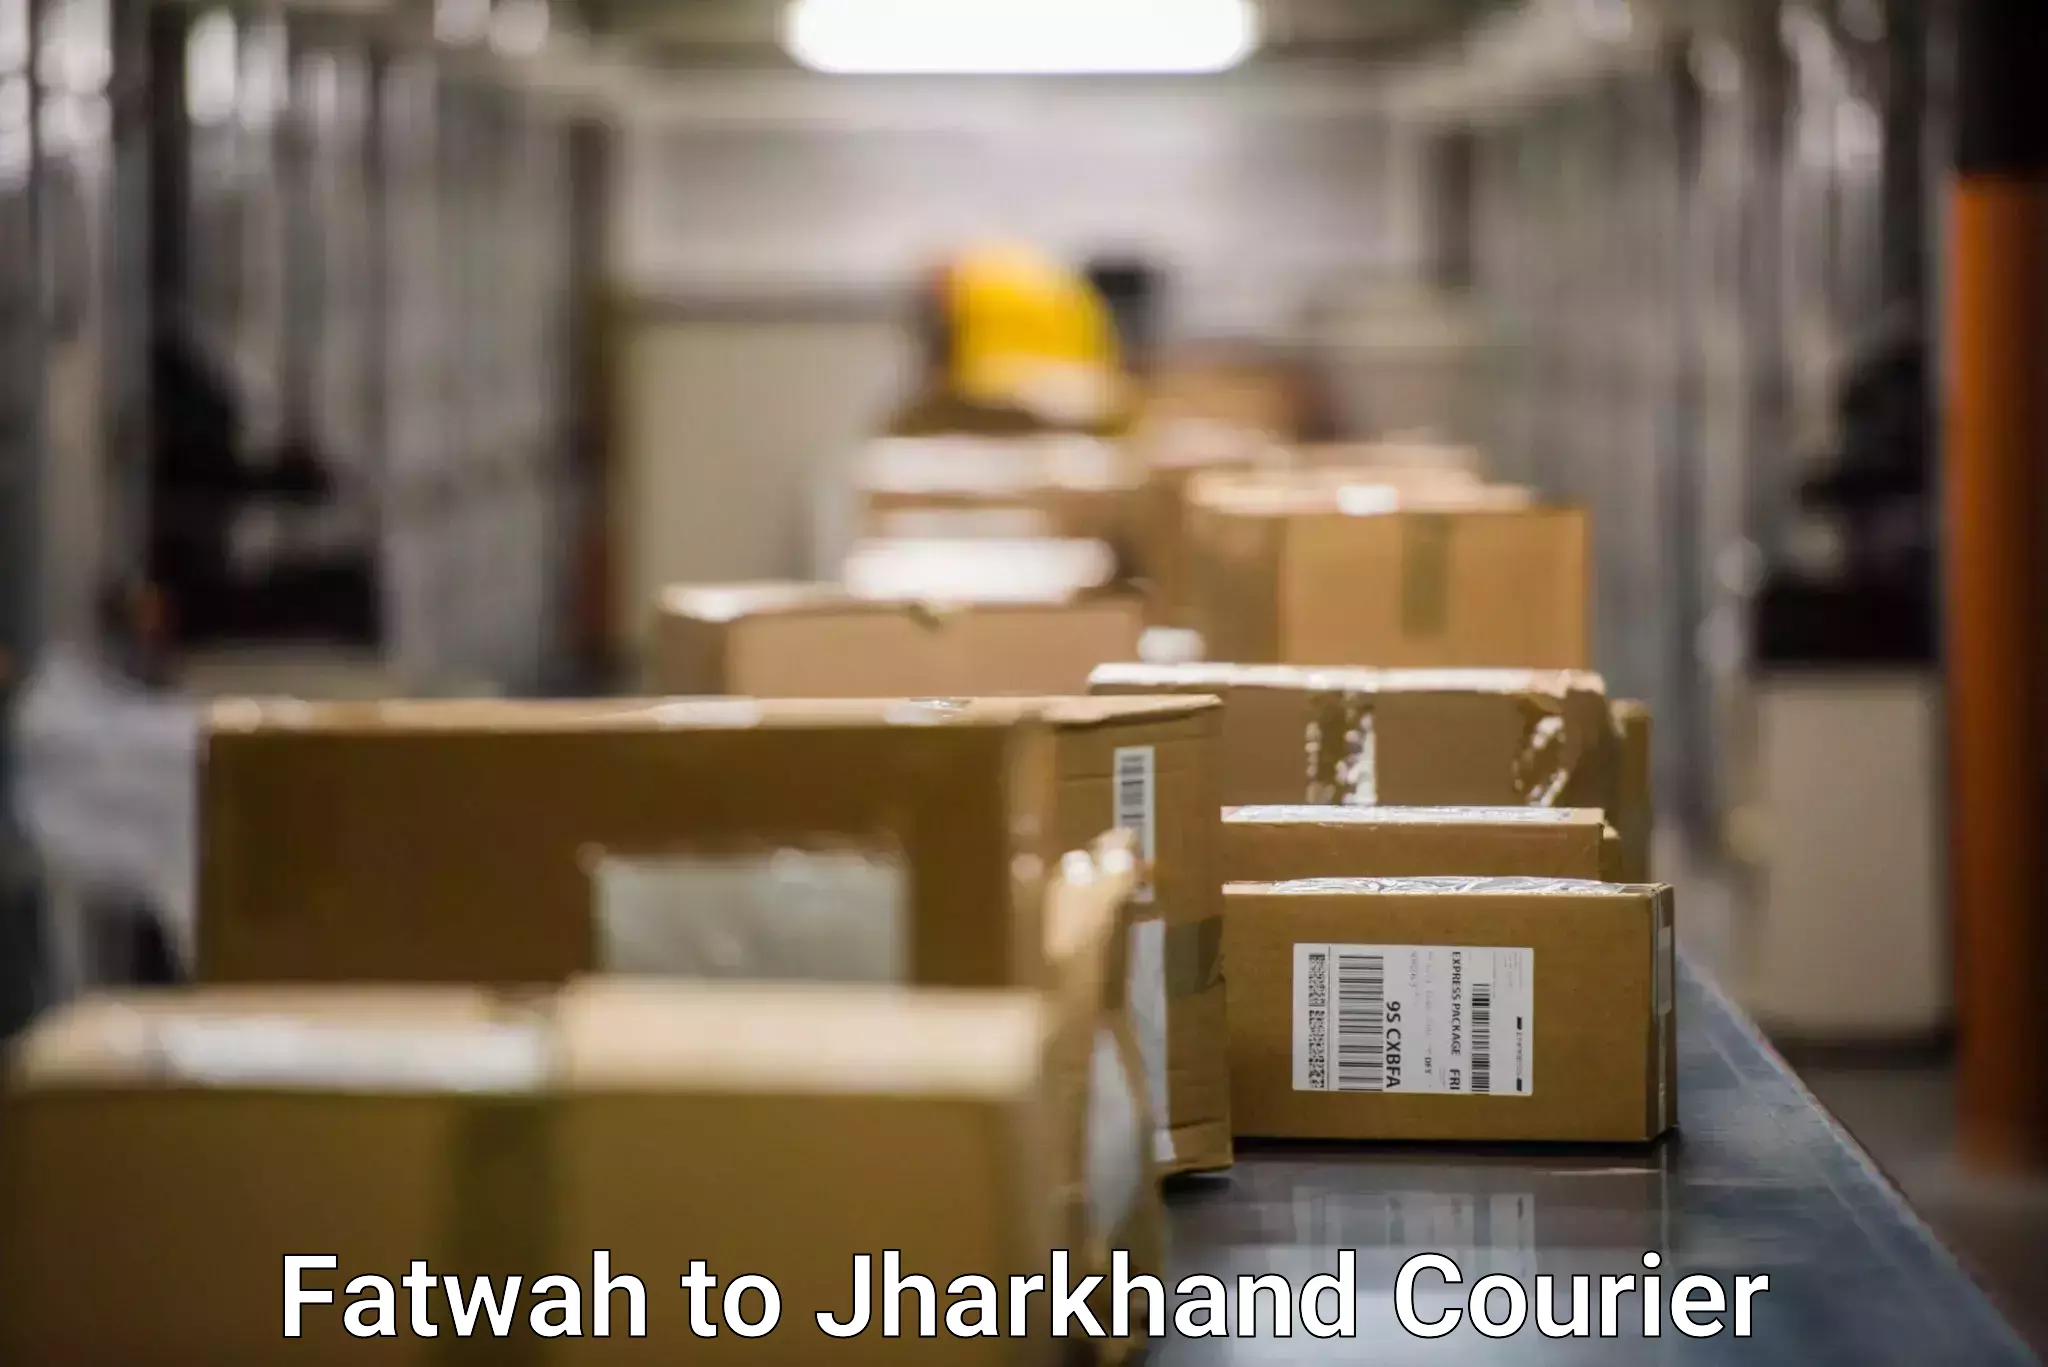 Reliable package handling Fatwah to Poreyahat